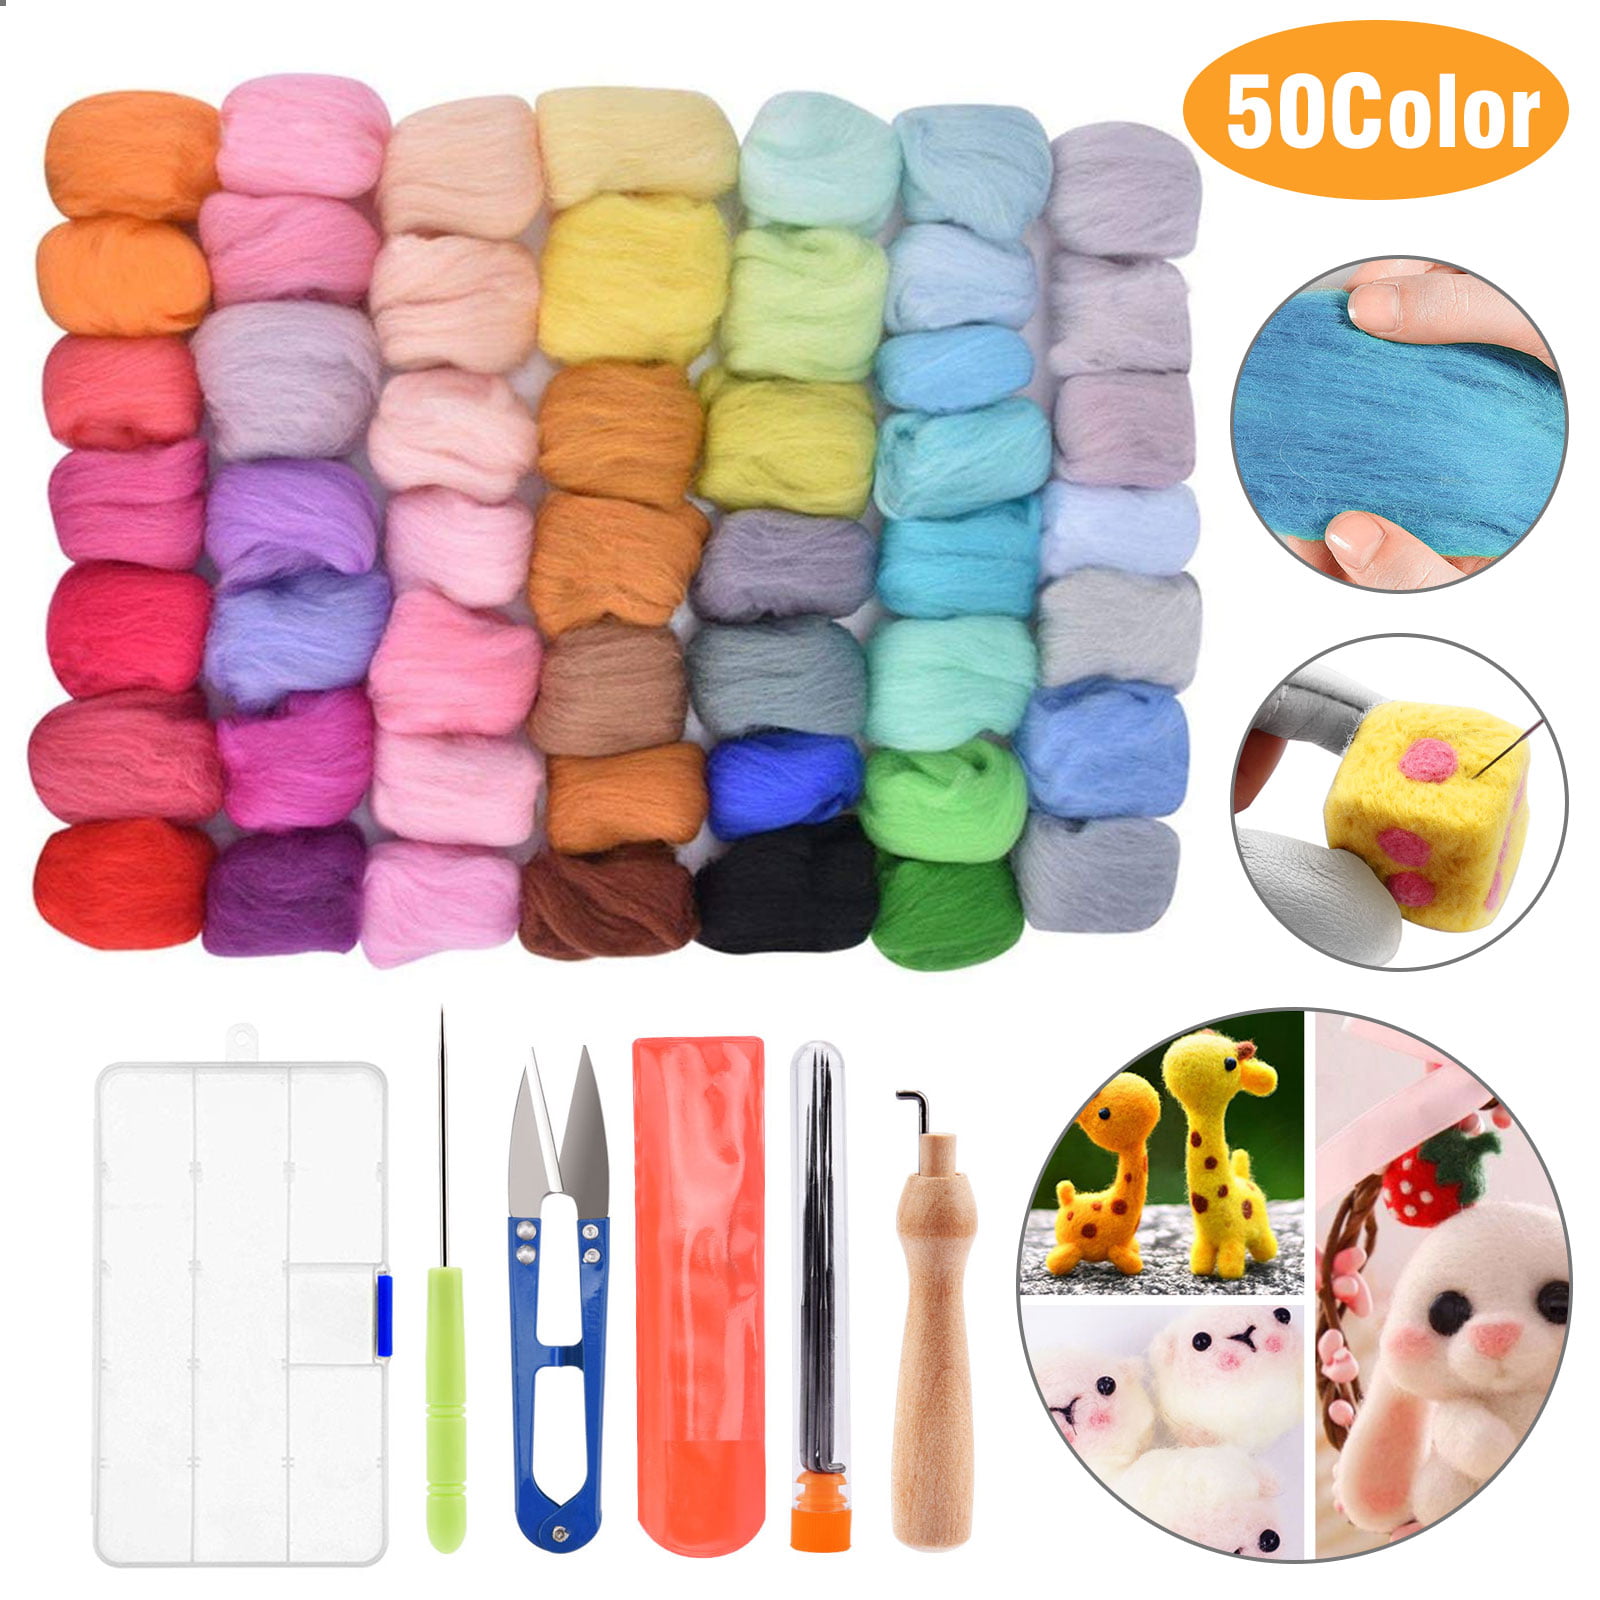 Needle Felting Kit Complete Needle Felting Tools and Supplies Includes Wool Roving Foam Mat Needle Felting Basic Tools Needle Felting Beginner Kits for DIY Felting Kids and Starters 